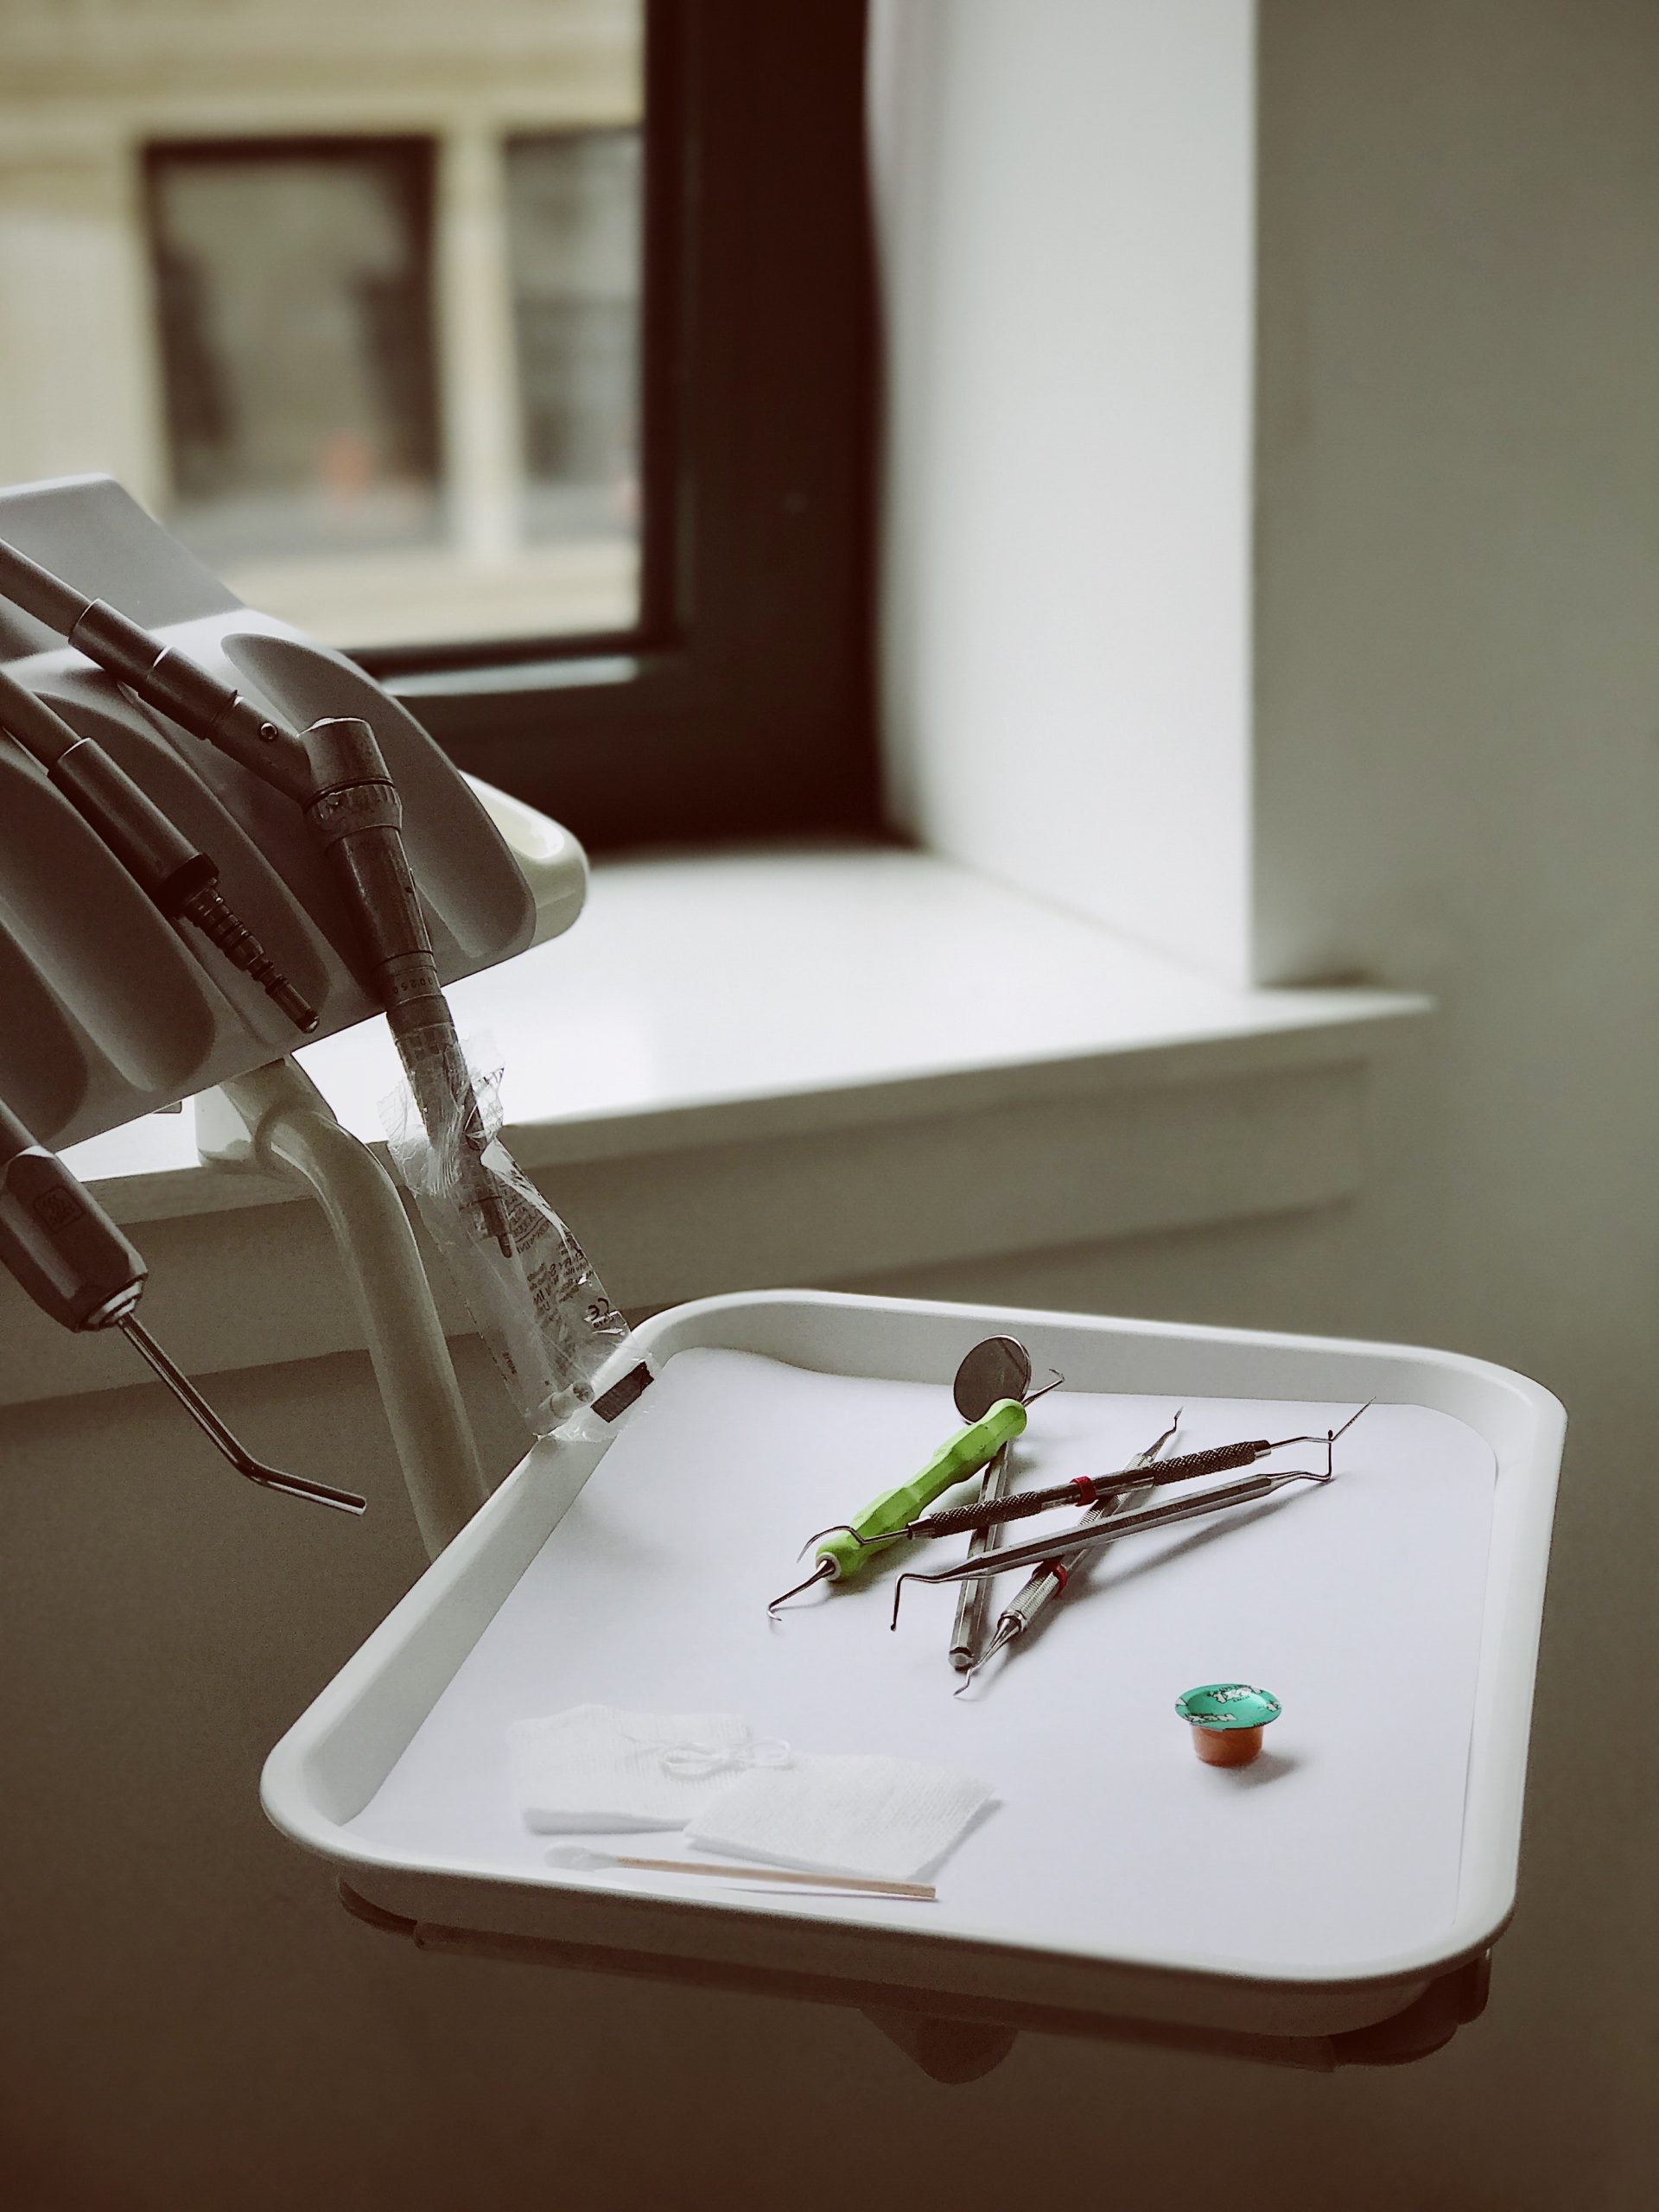 Dental Cleanings: What You Need to Know